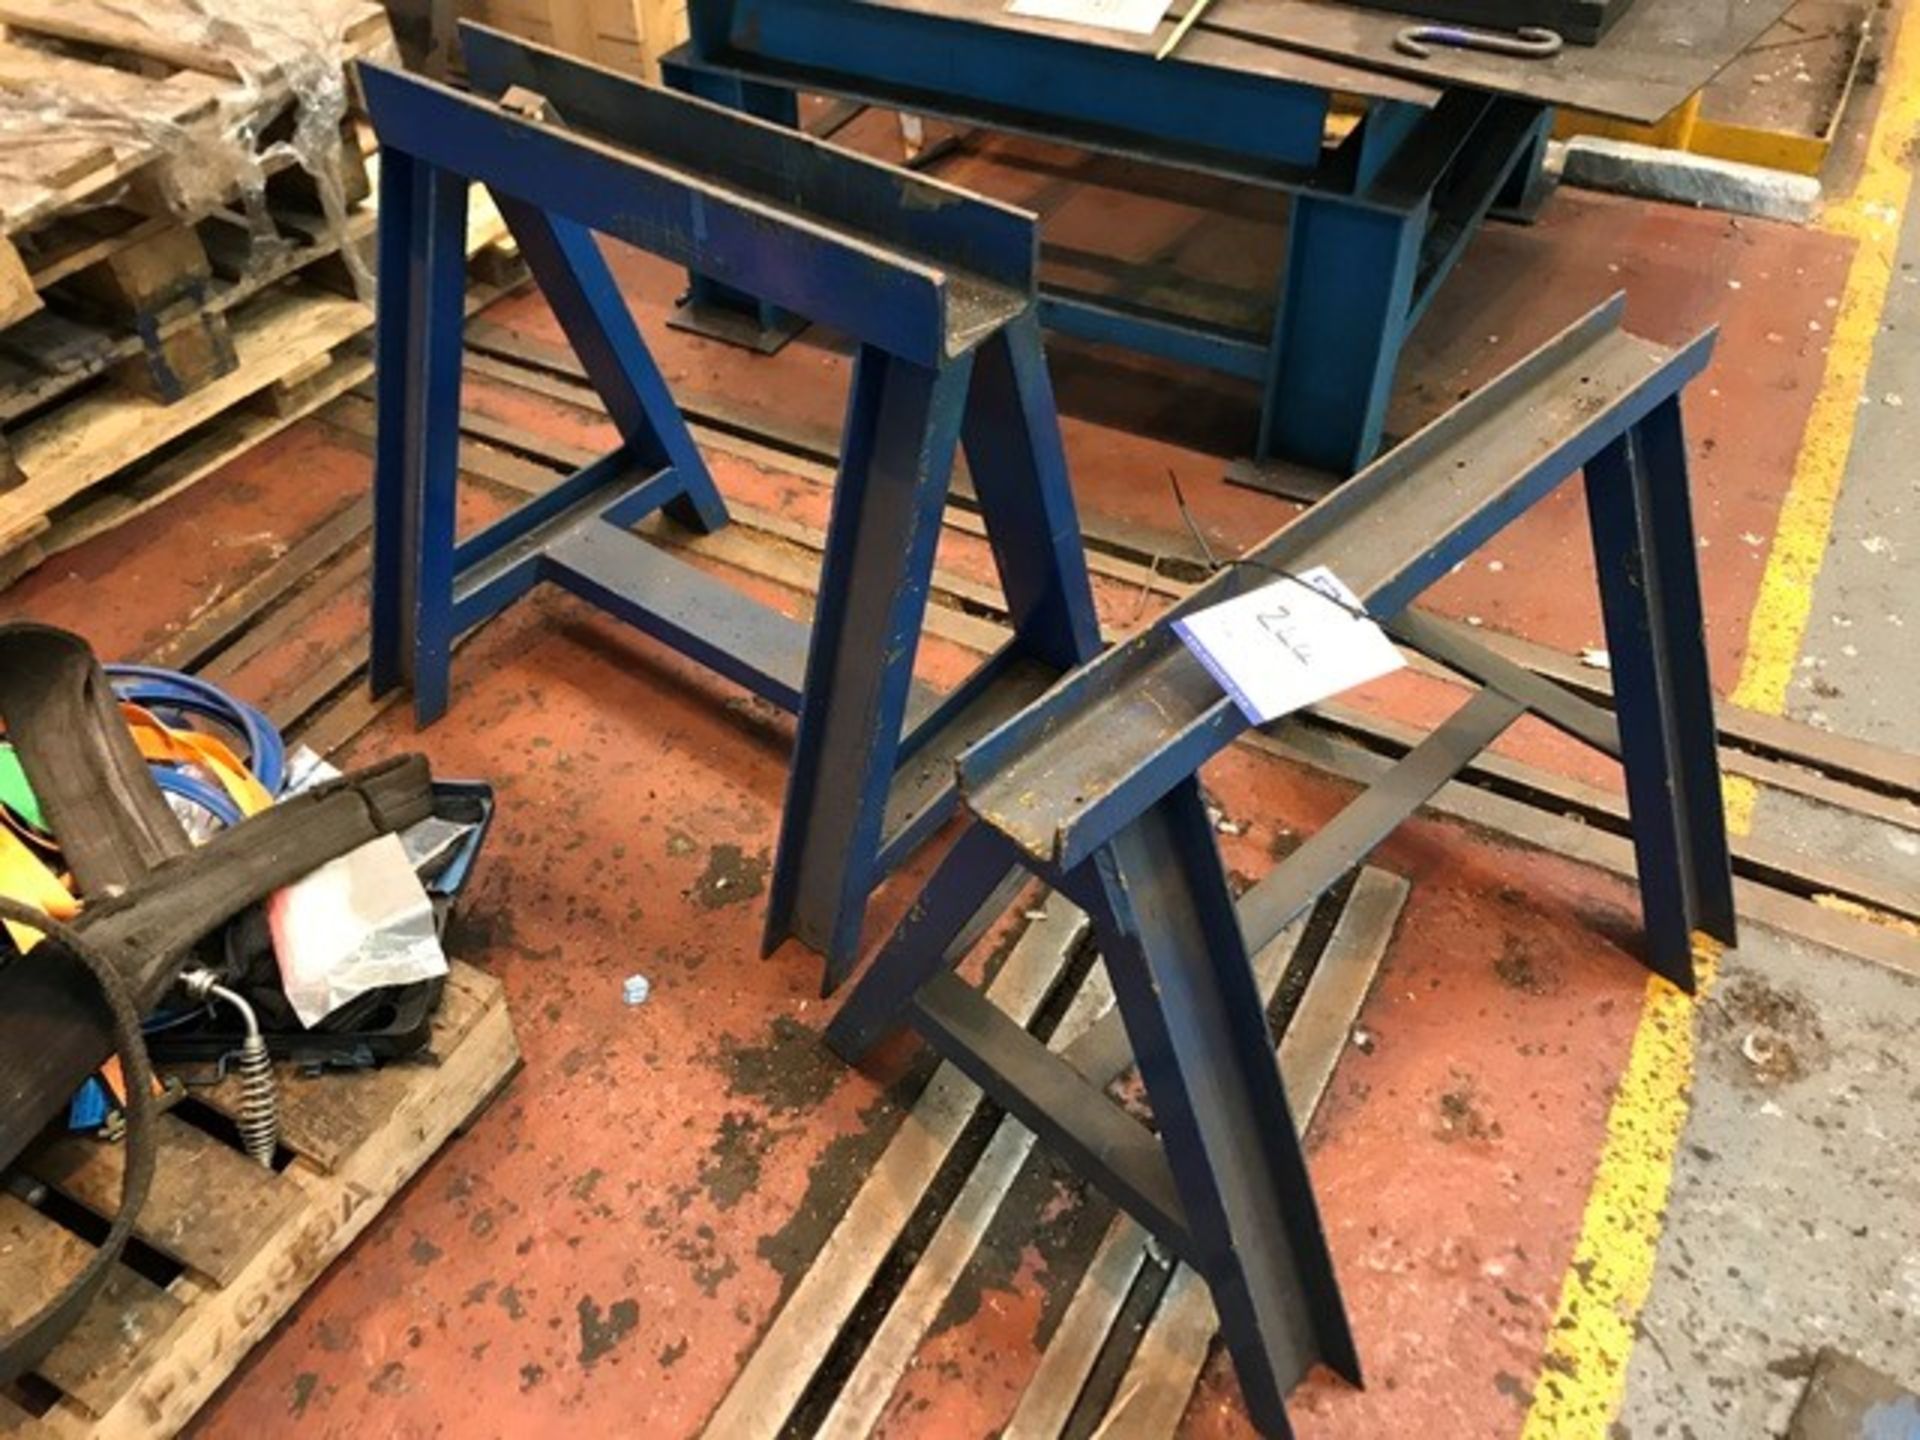 3 trestles and 1 roller stand